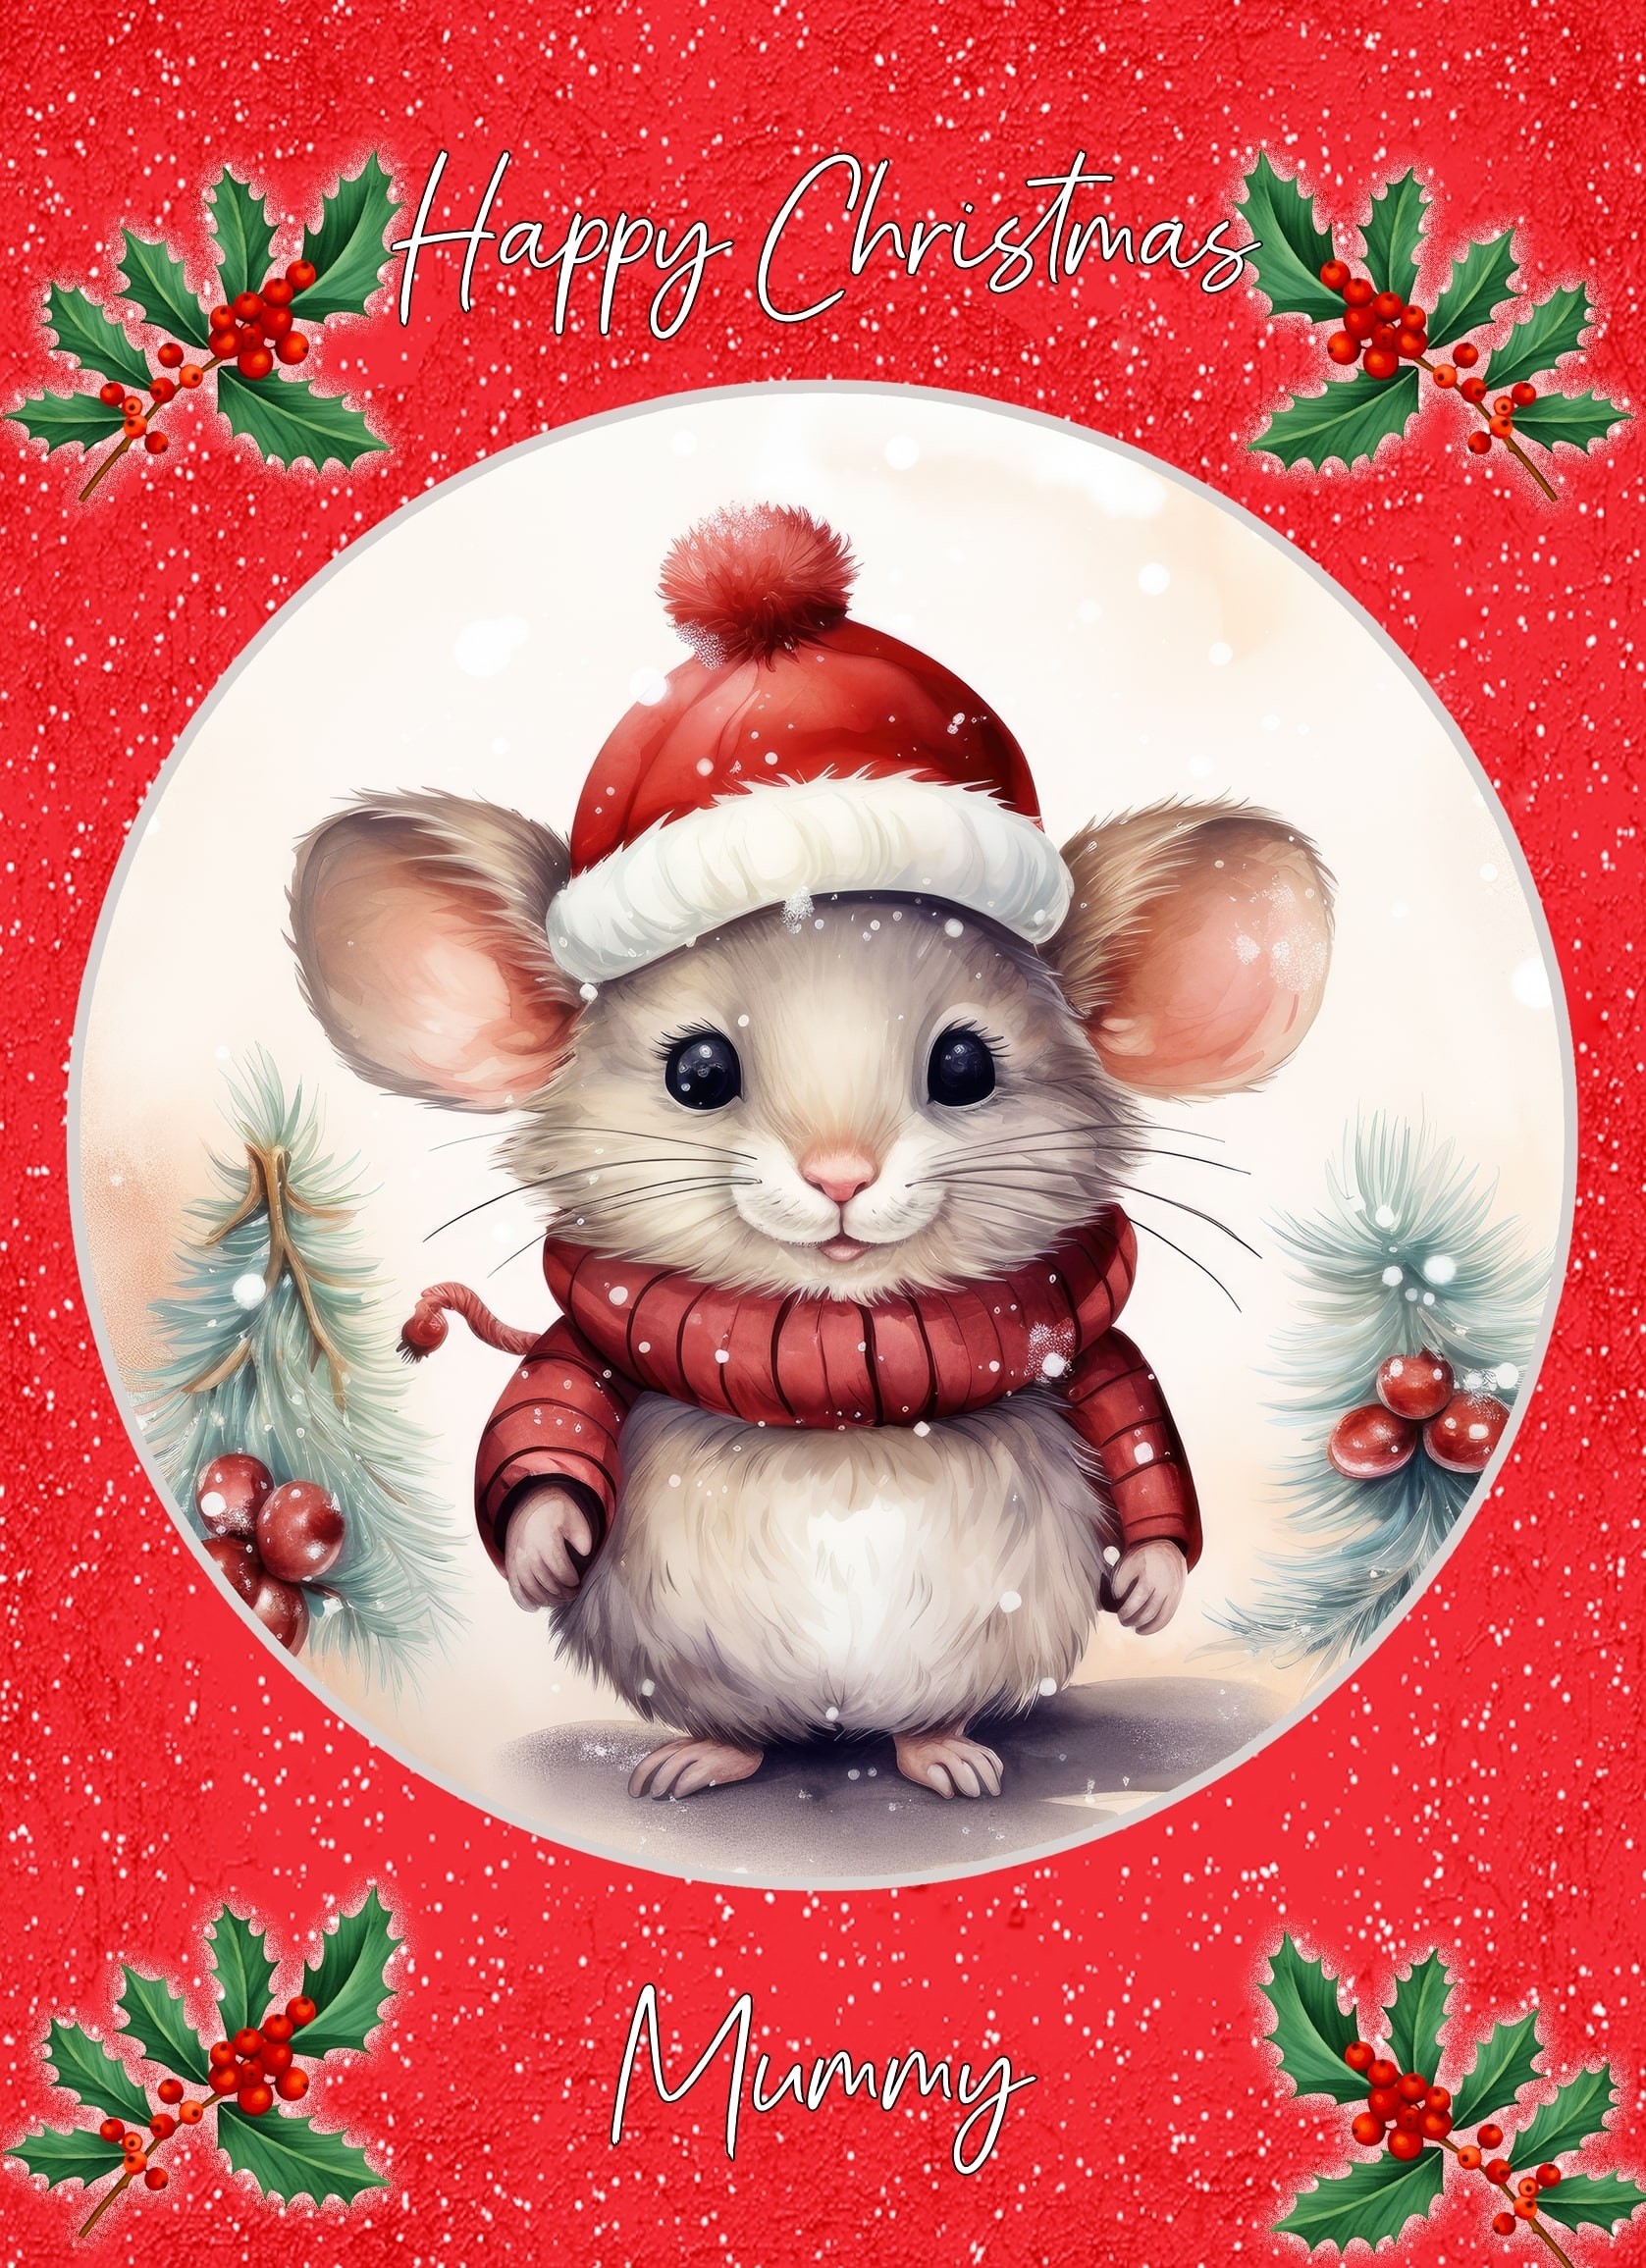 Christmas Card For Mummy (Globe, Mouse)